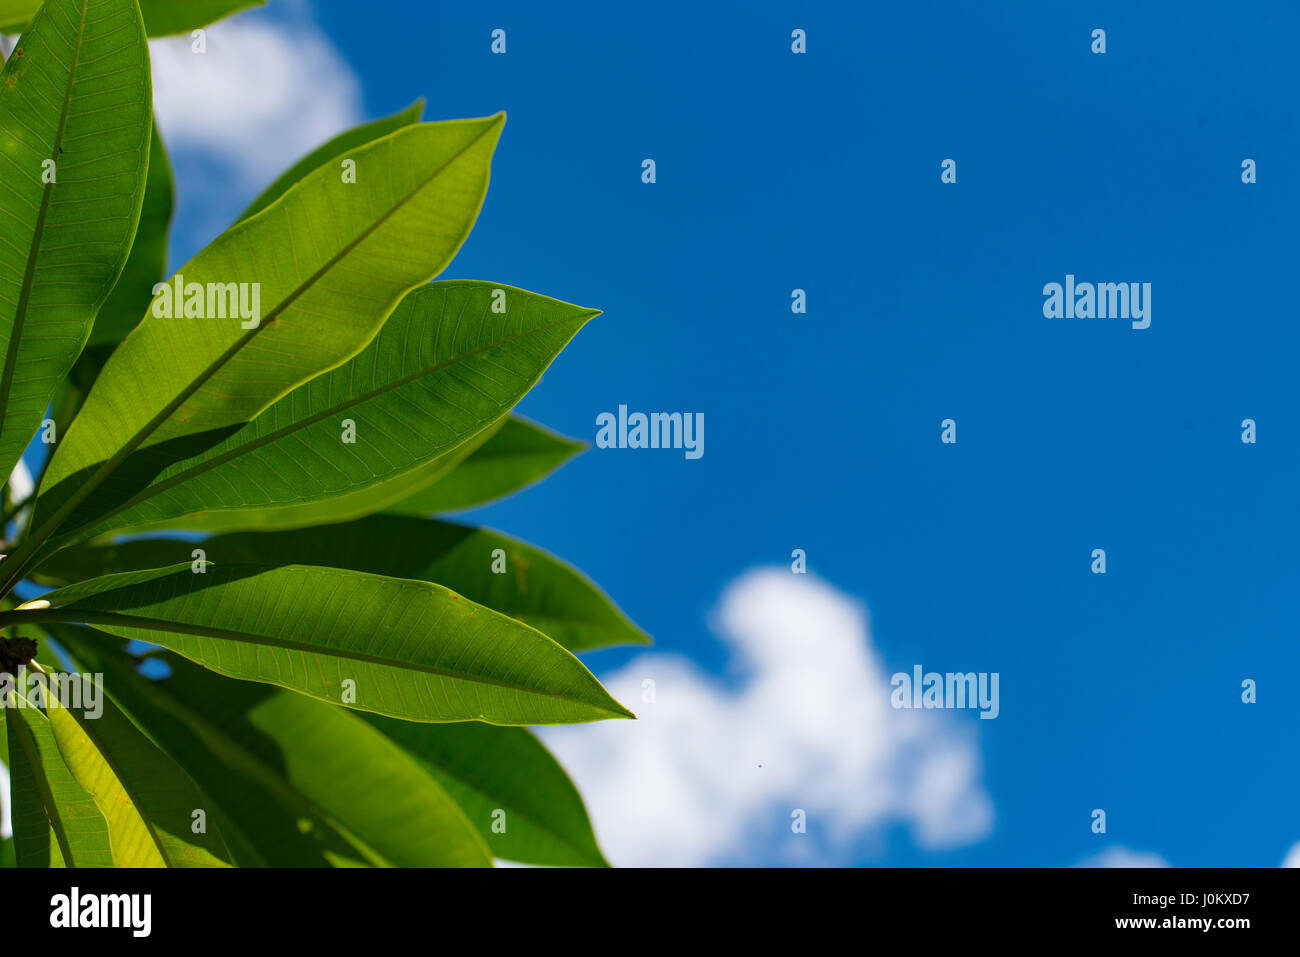 The leaves of a Frangipani (Plumeria) form a natural tropical clock face against a blue sky in Sydney, Australia Stock Photo